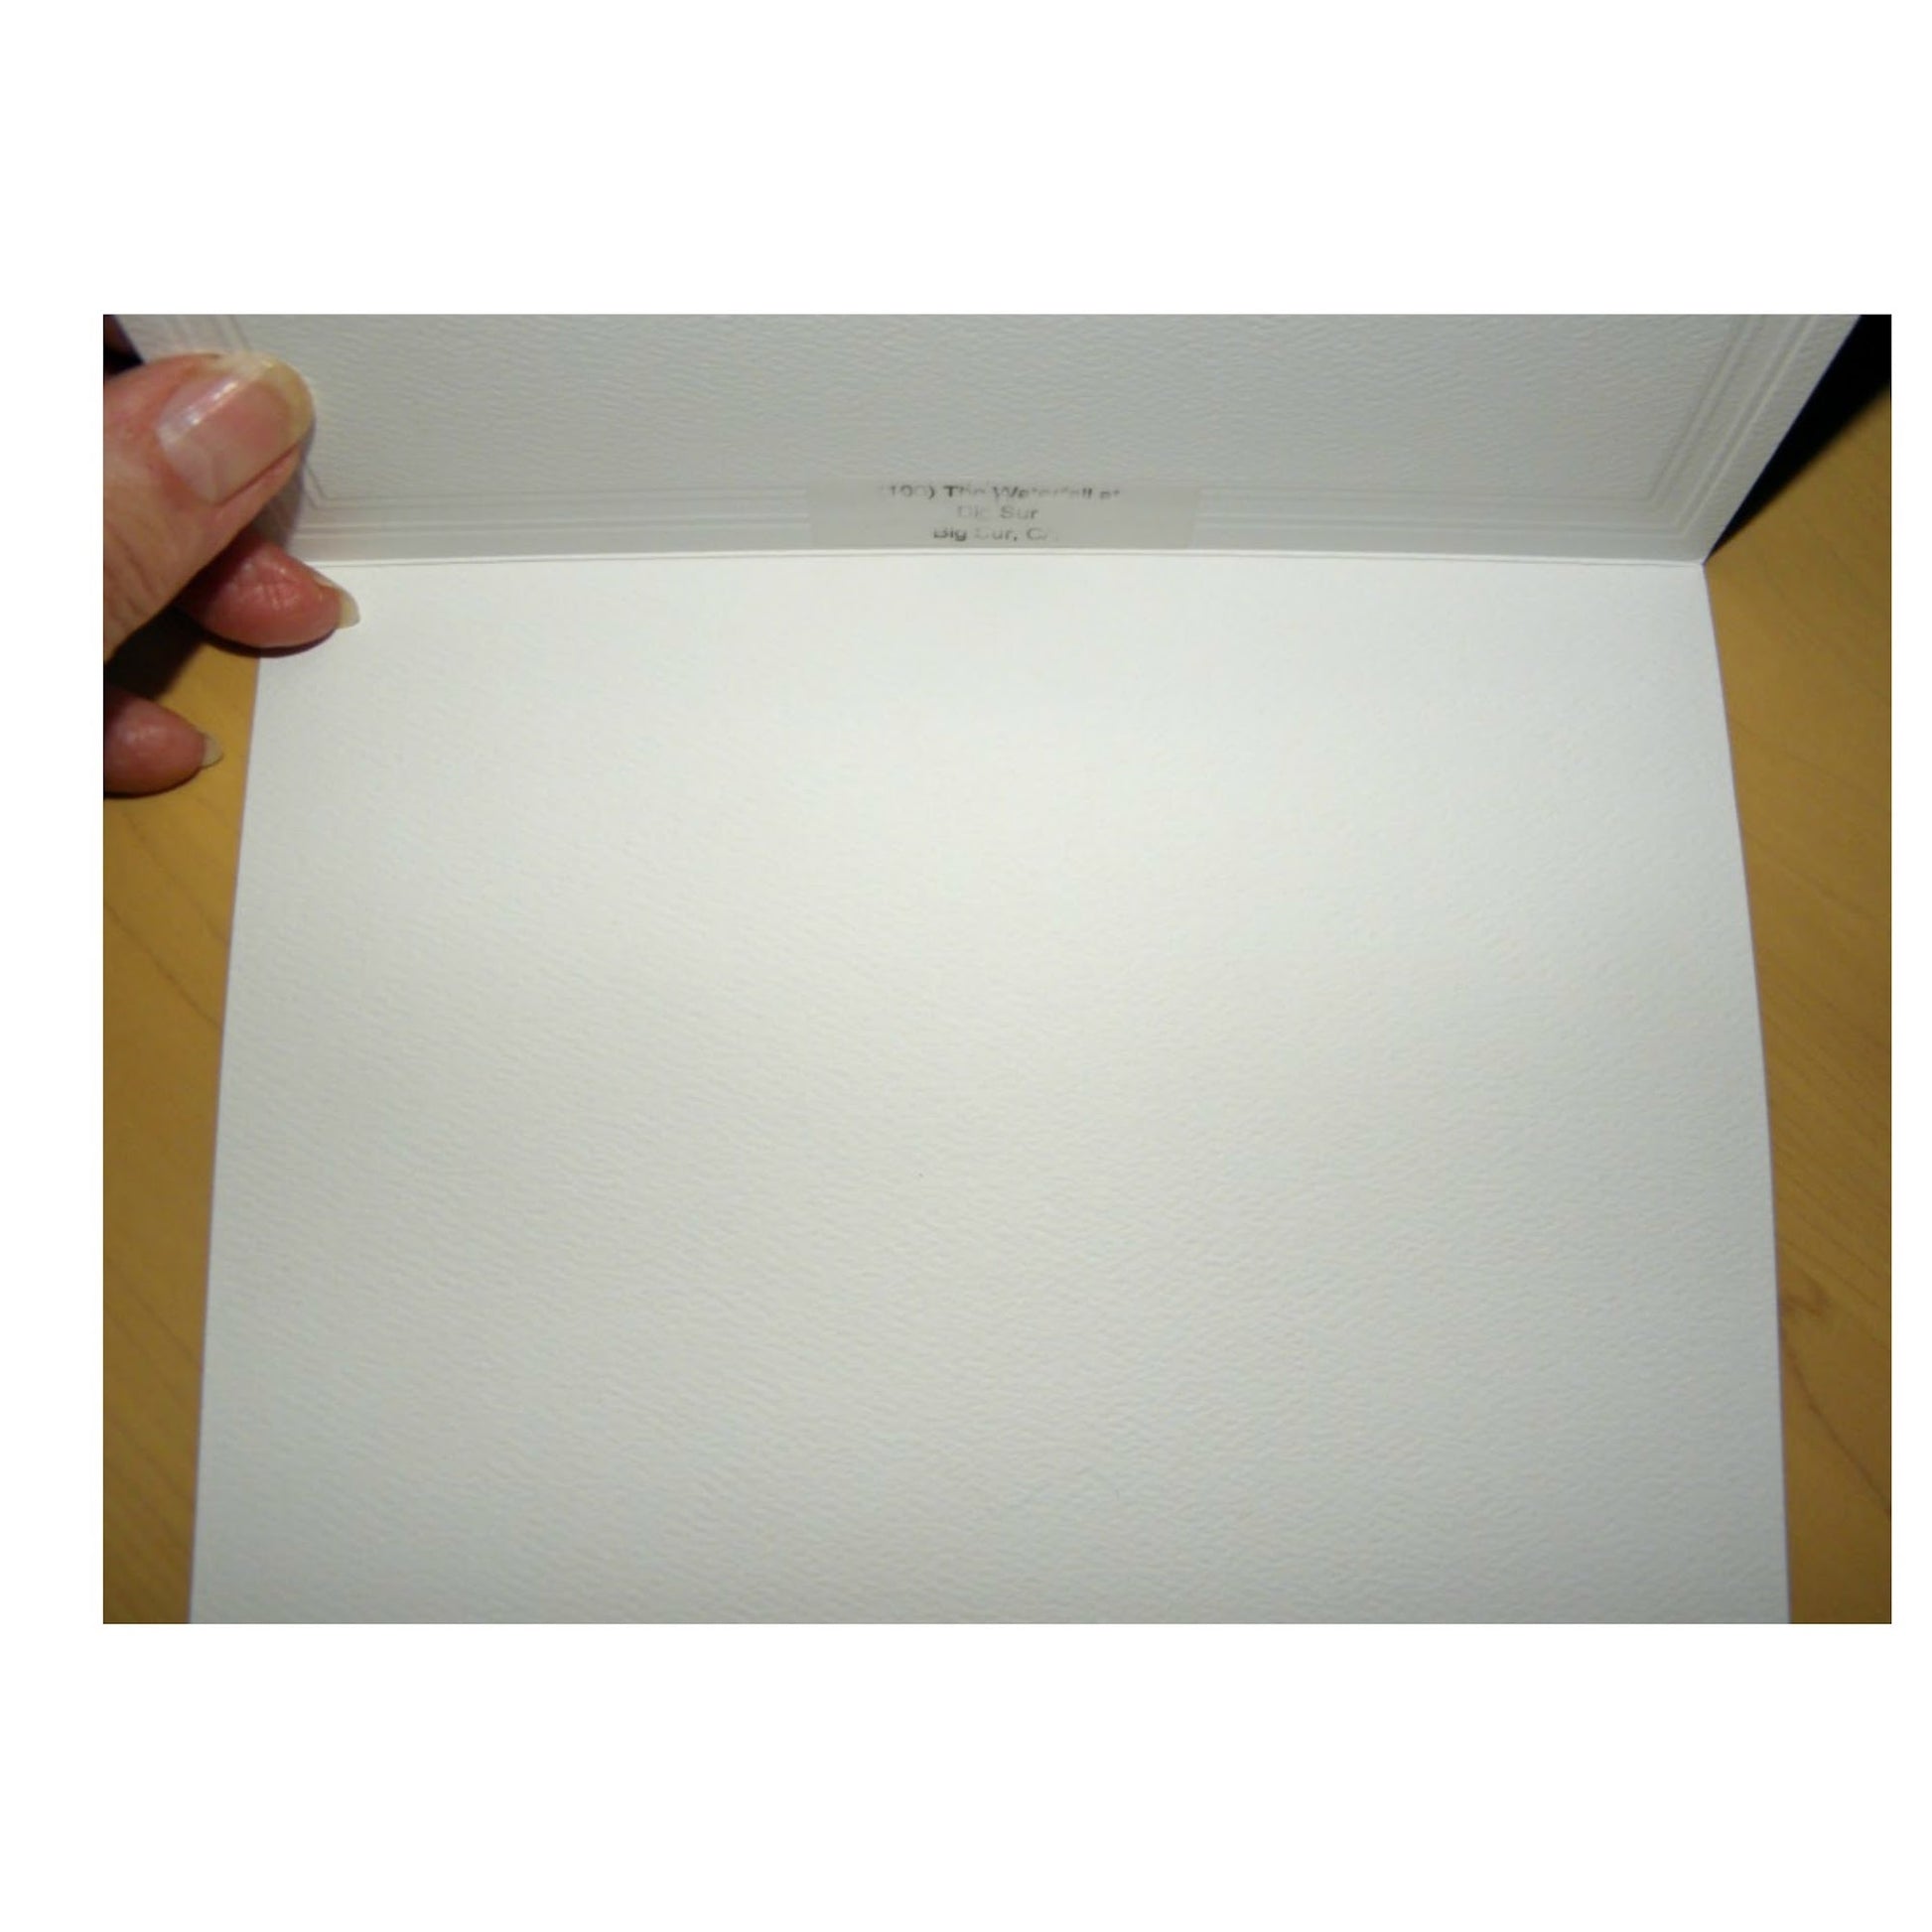 Mock up of the blank inside card